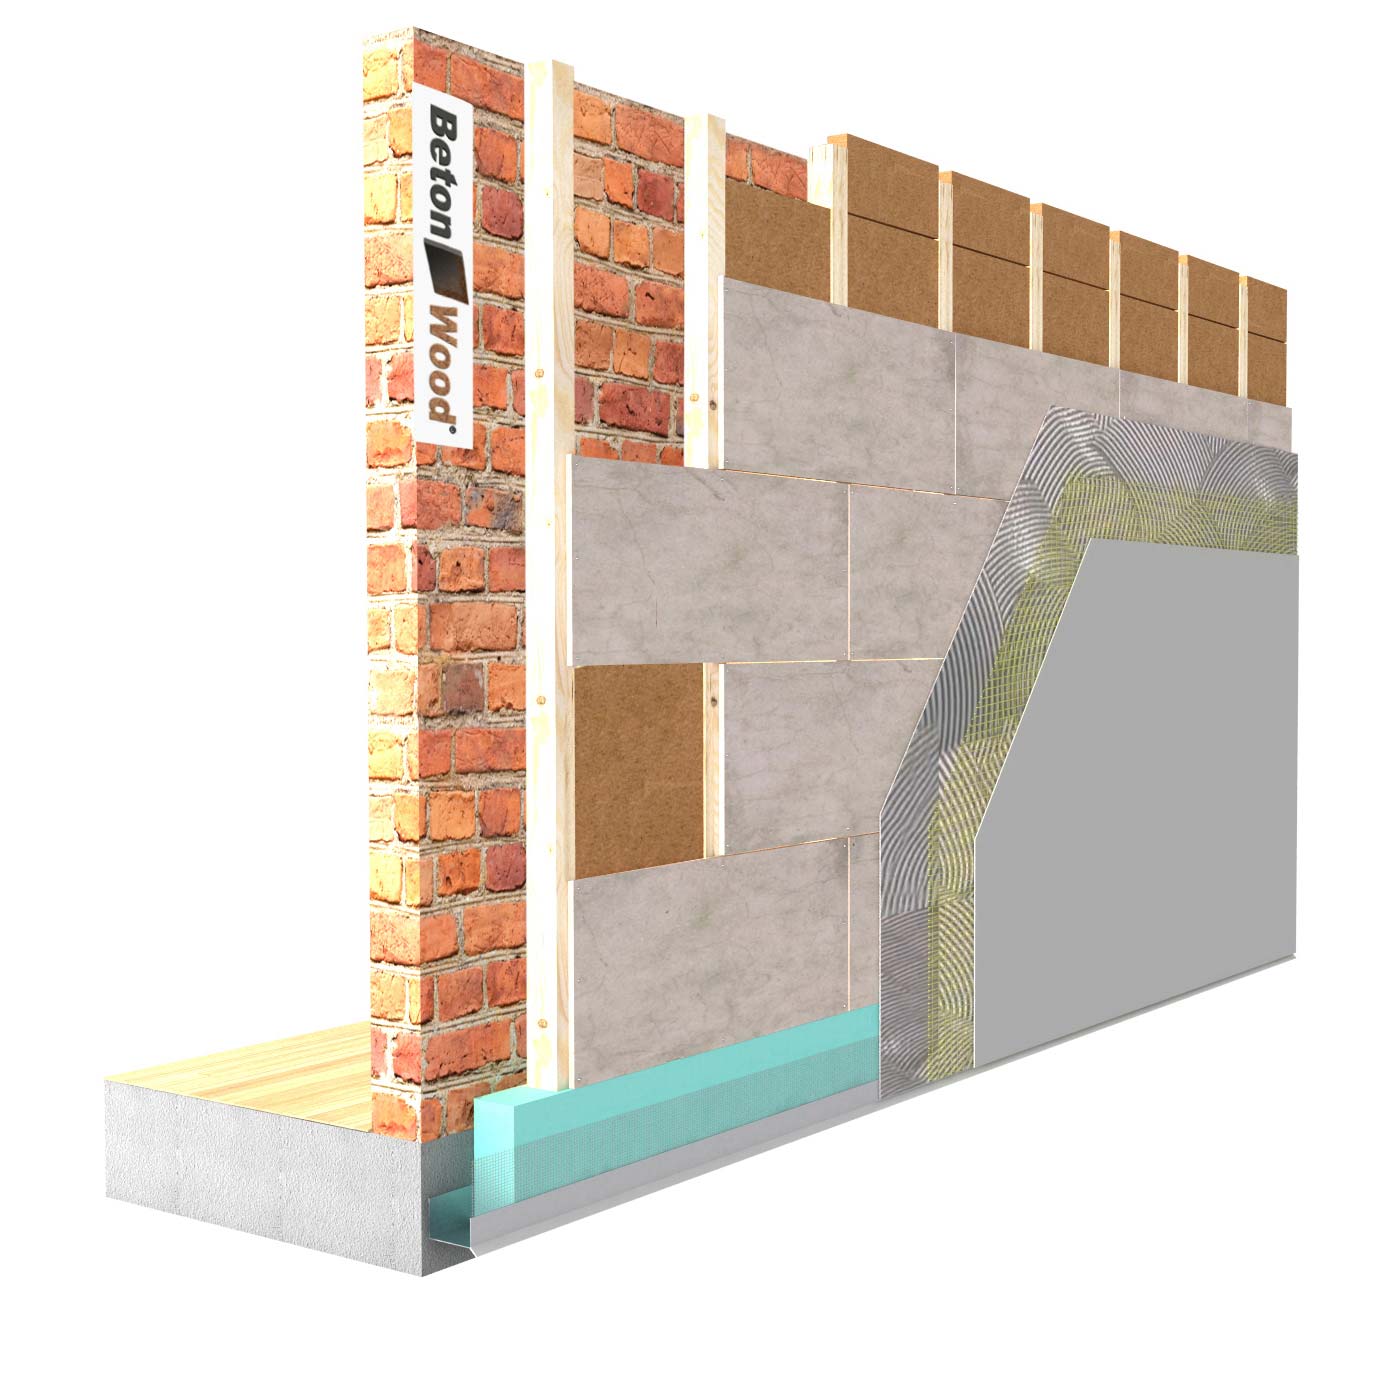 External insulation system with Therm wood fiber on masonry